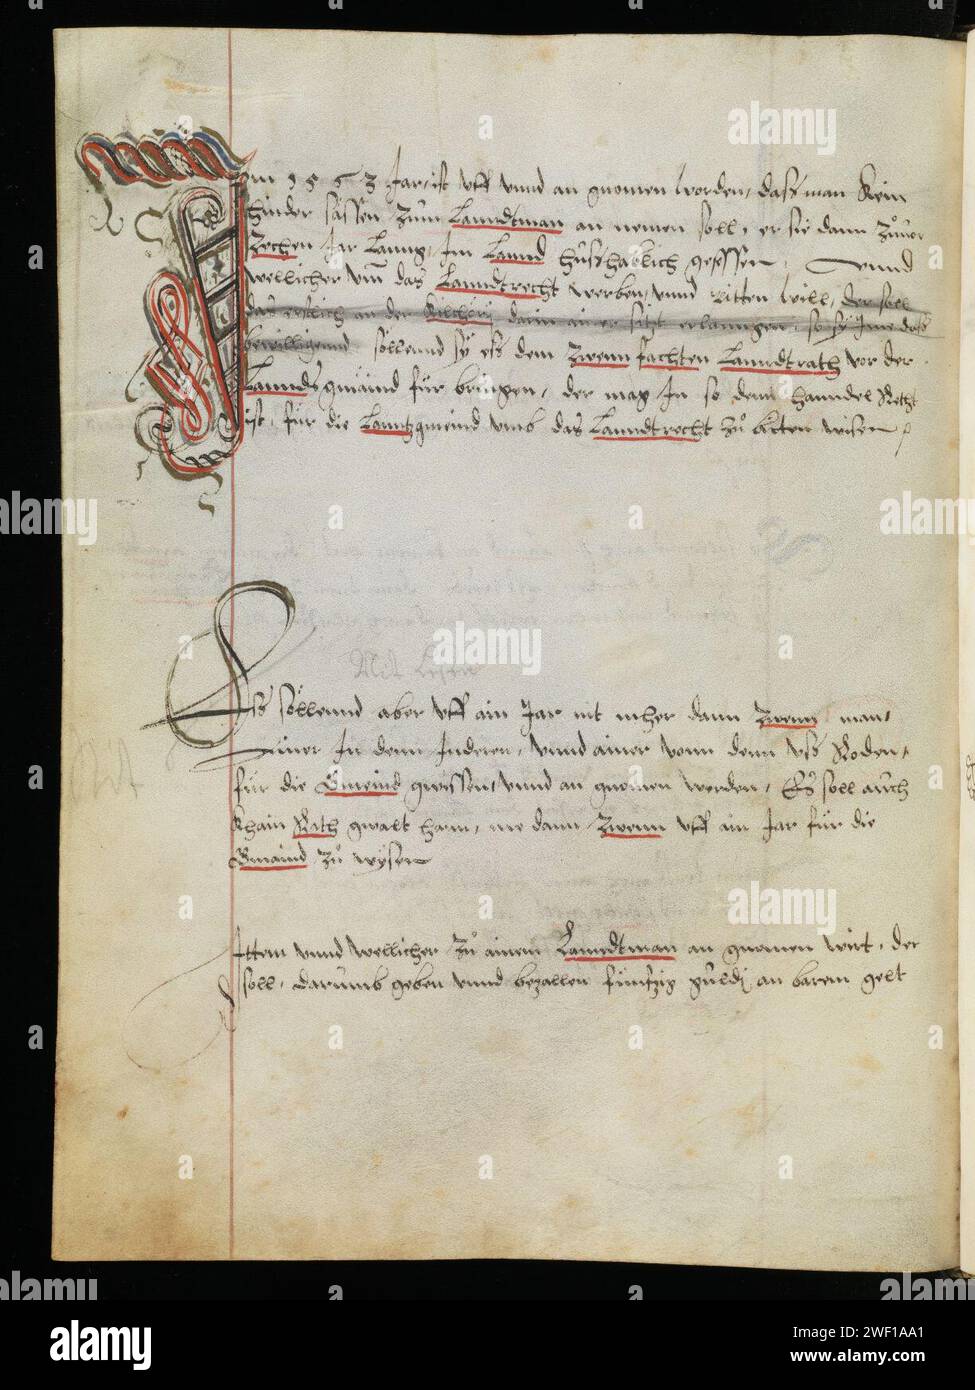 Appenzell, Landesarchiv Appenzell Innerrhoden, E.10.02.01.01, f. 63v – Silver Book of the Land. Stock Photo